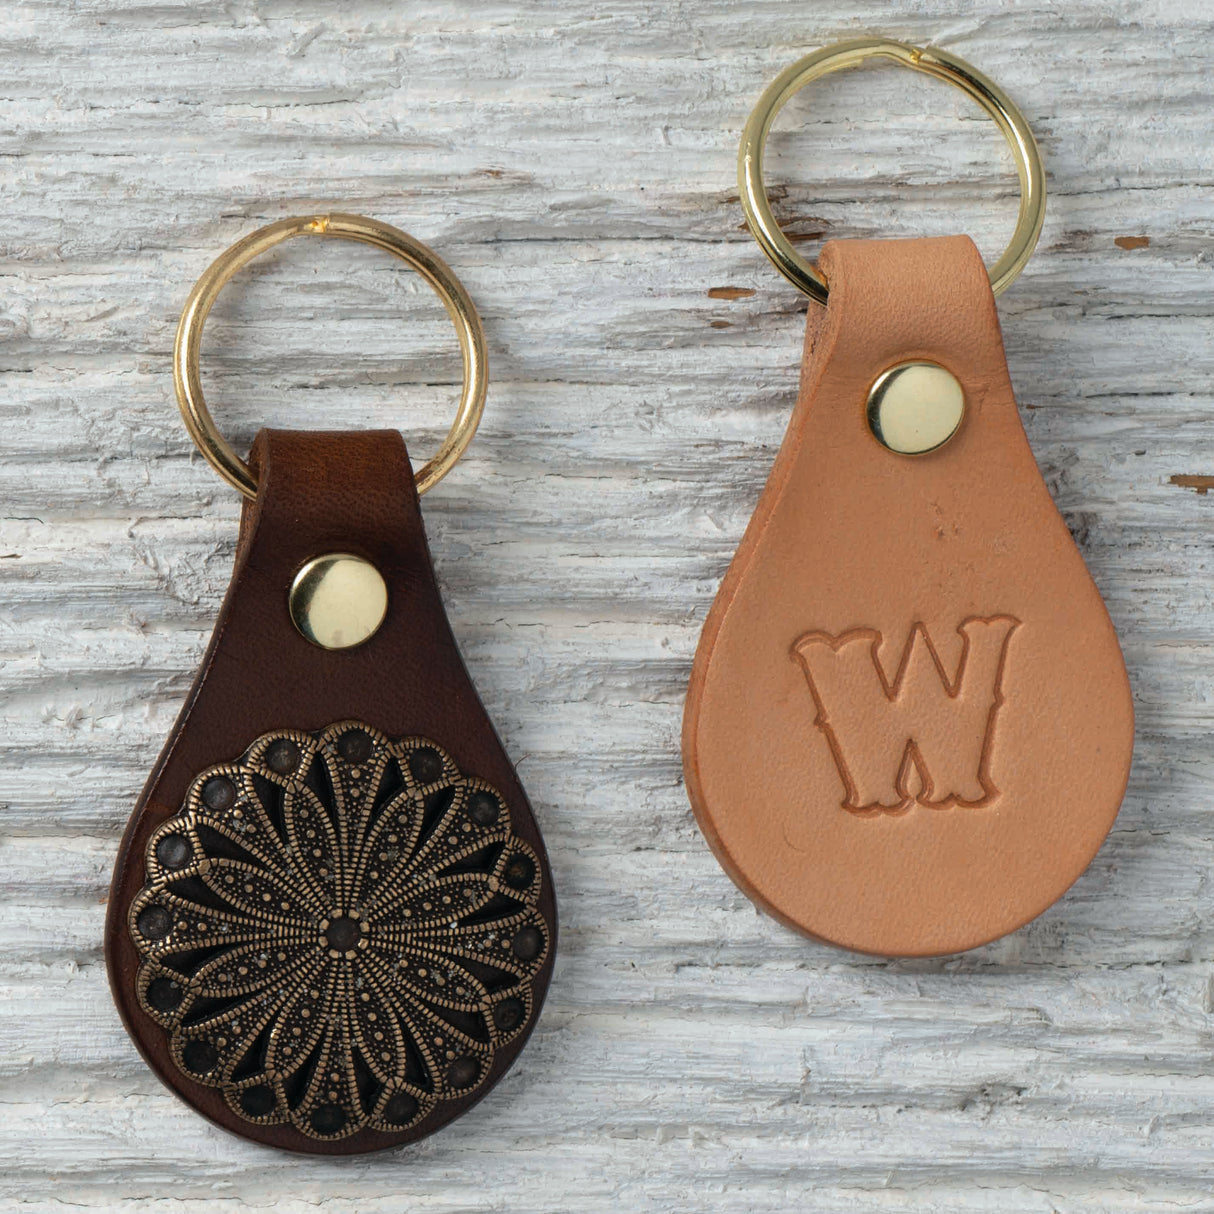 Real Leather key chain blanks, Pack of Keychains , wholesale